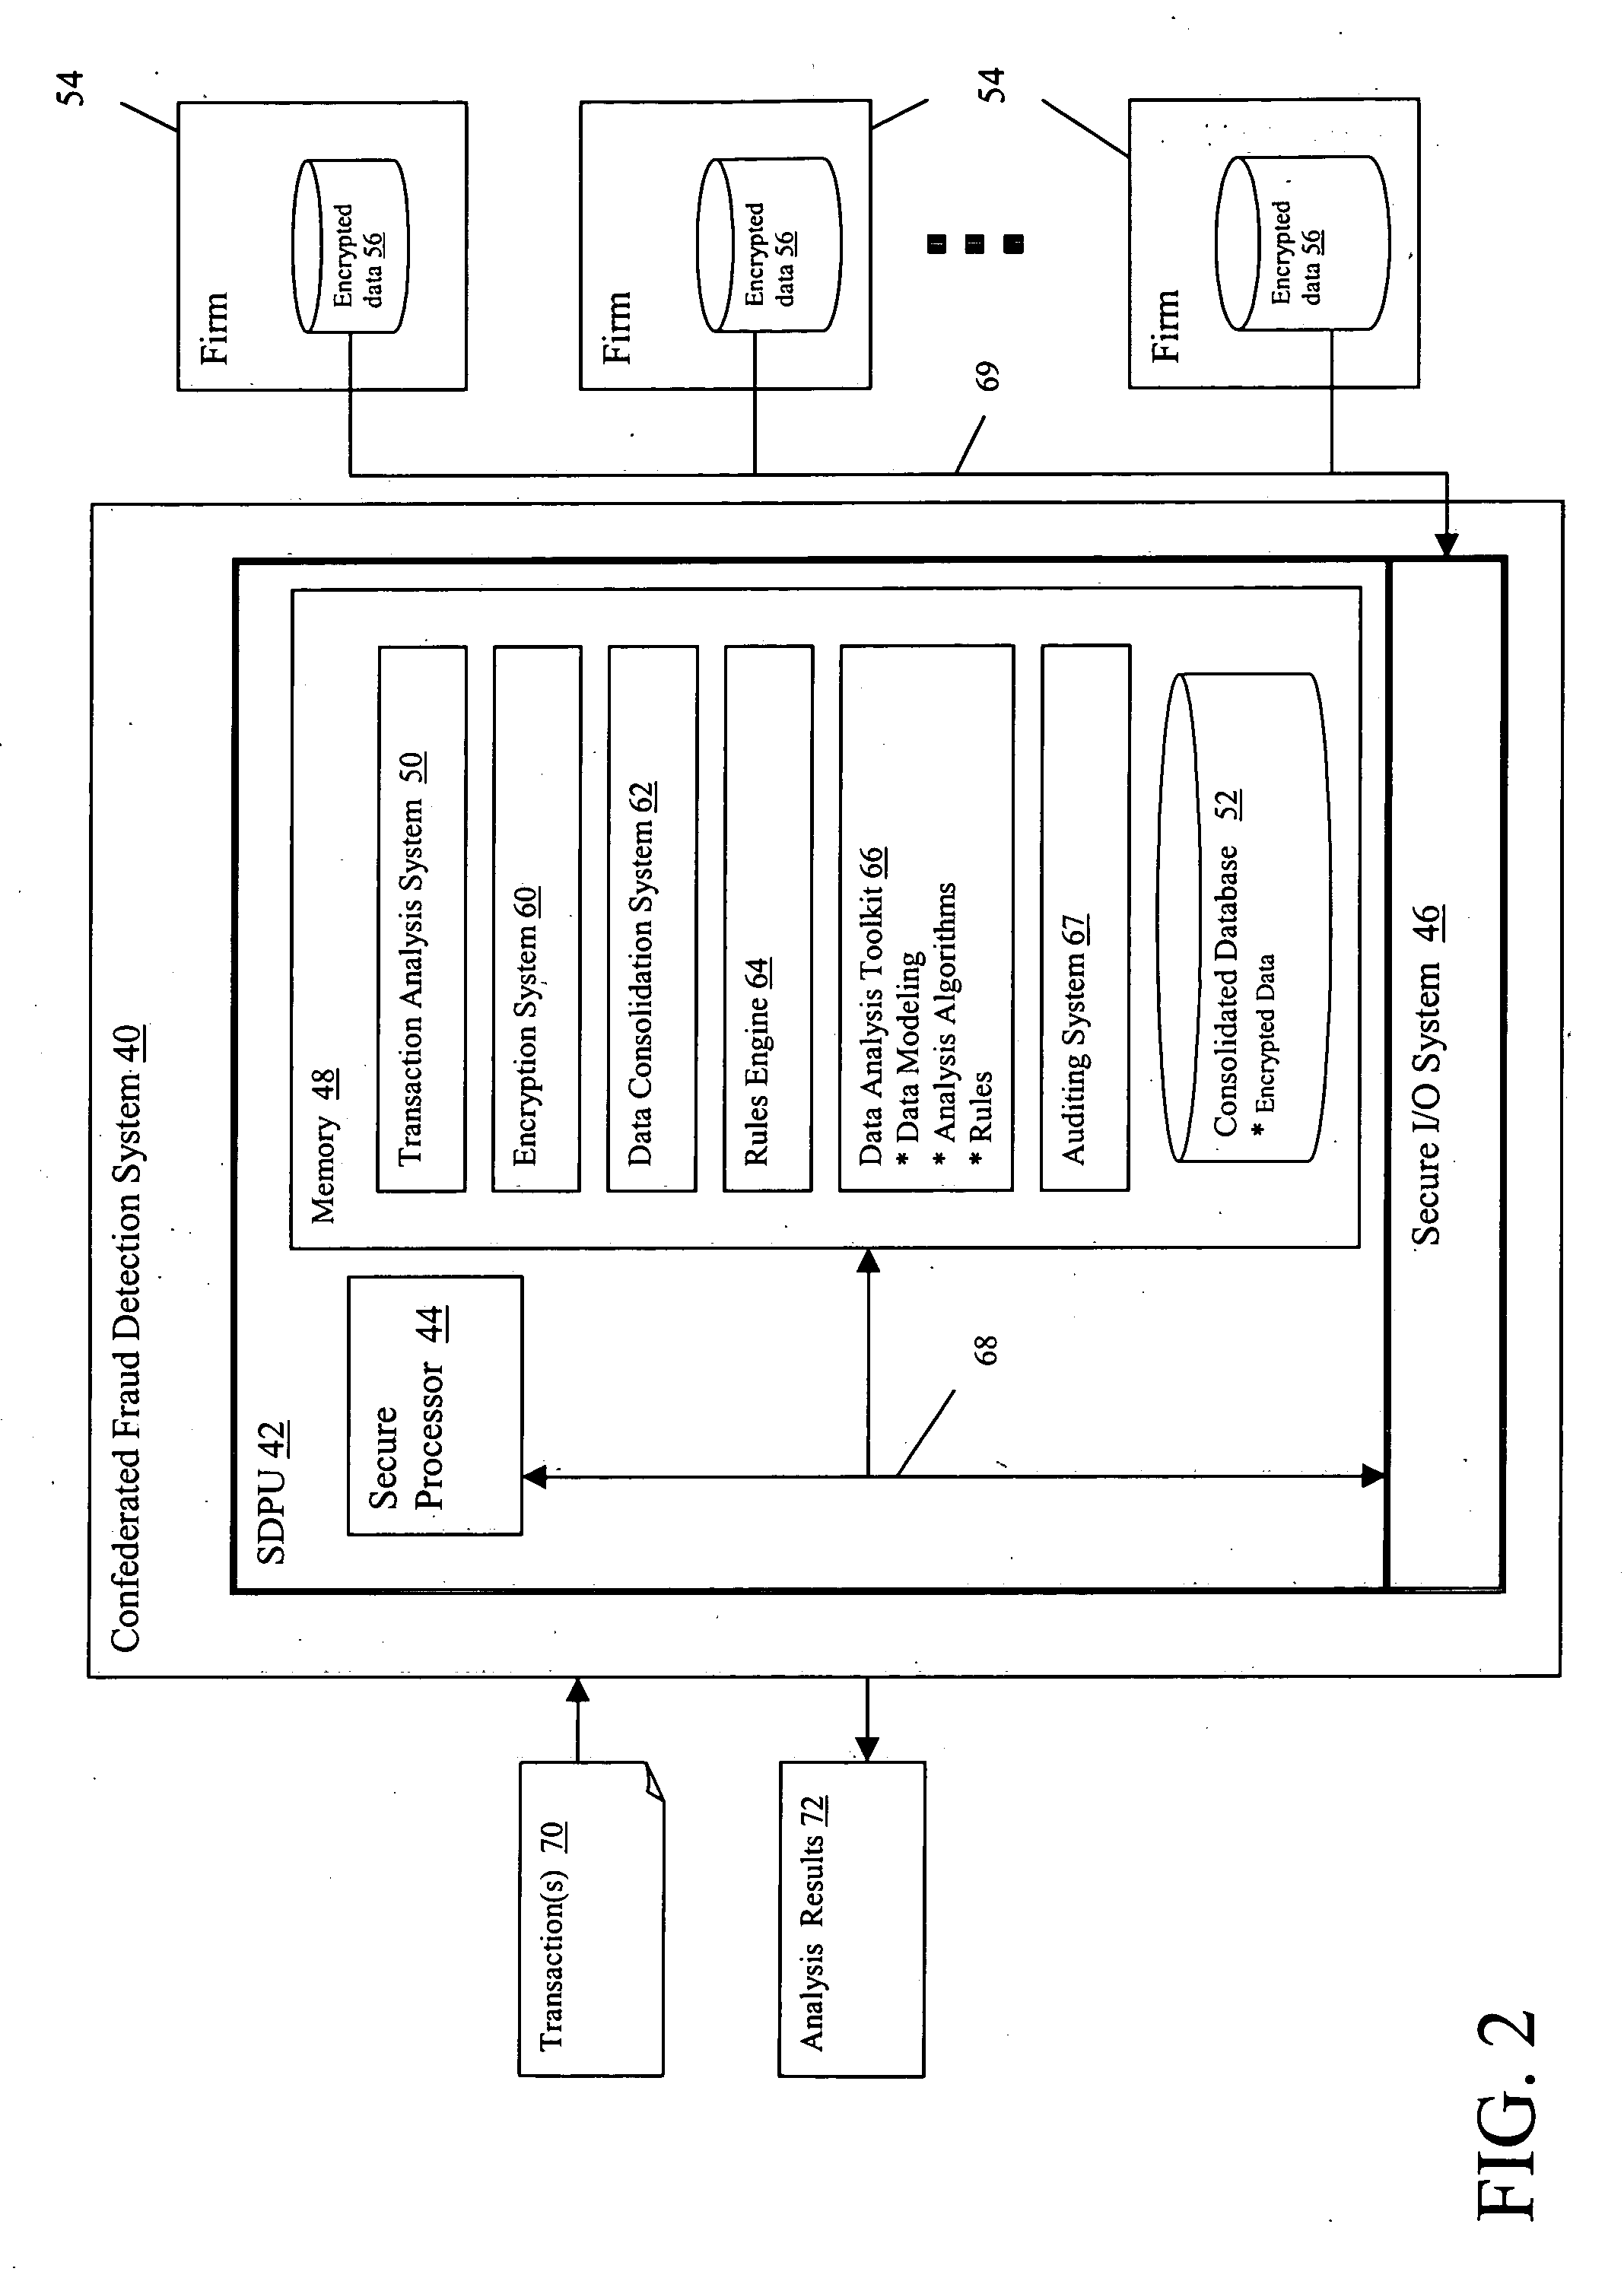 Confidential fraud detection system and method